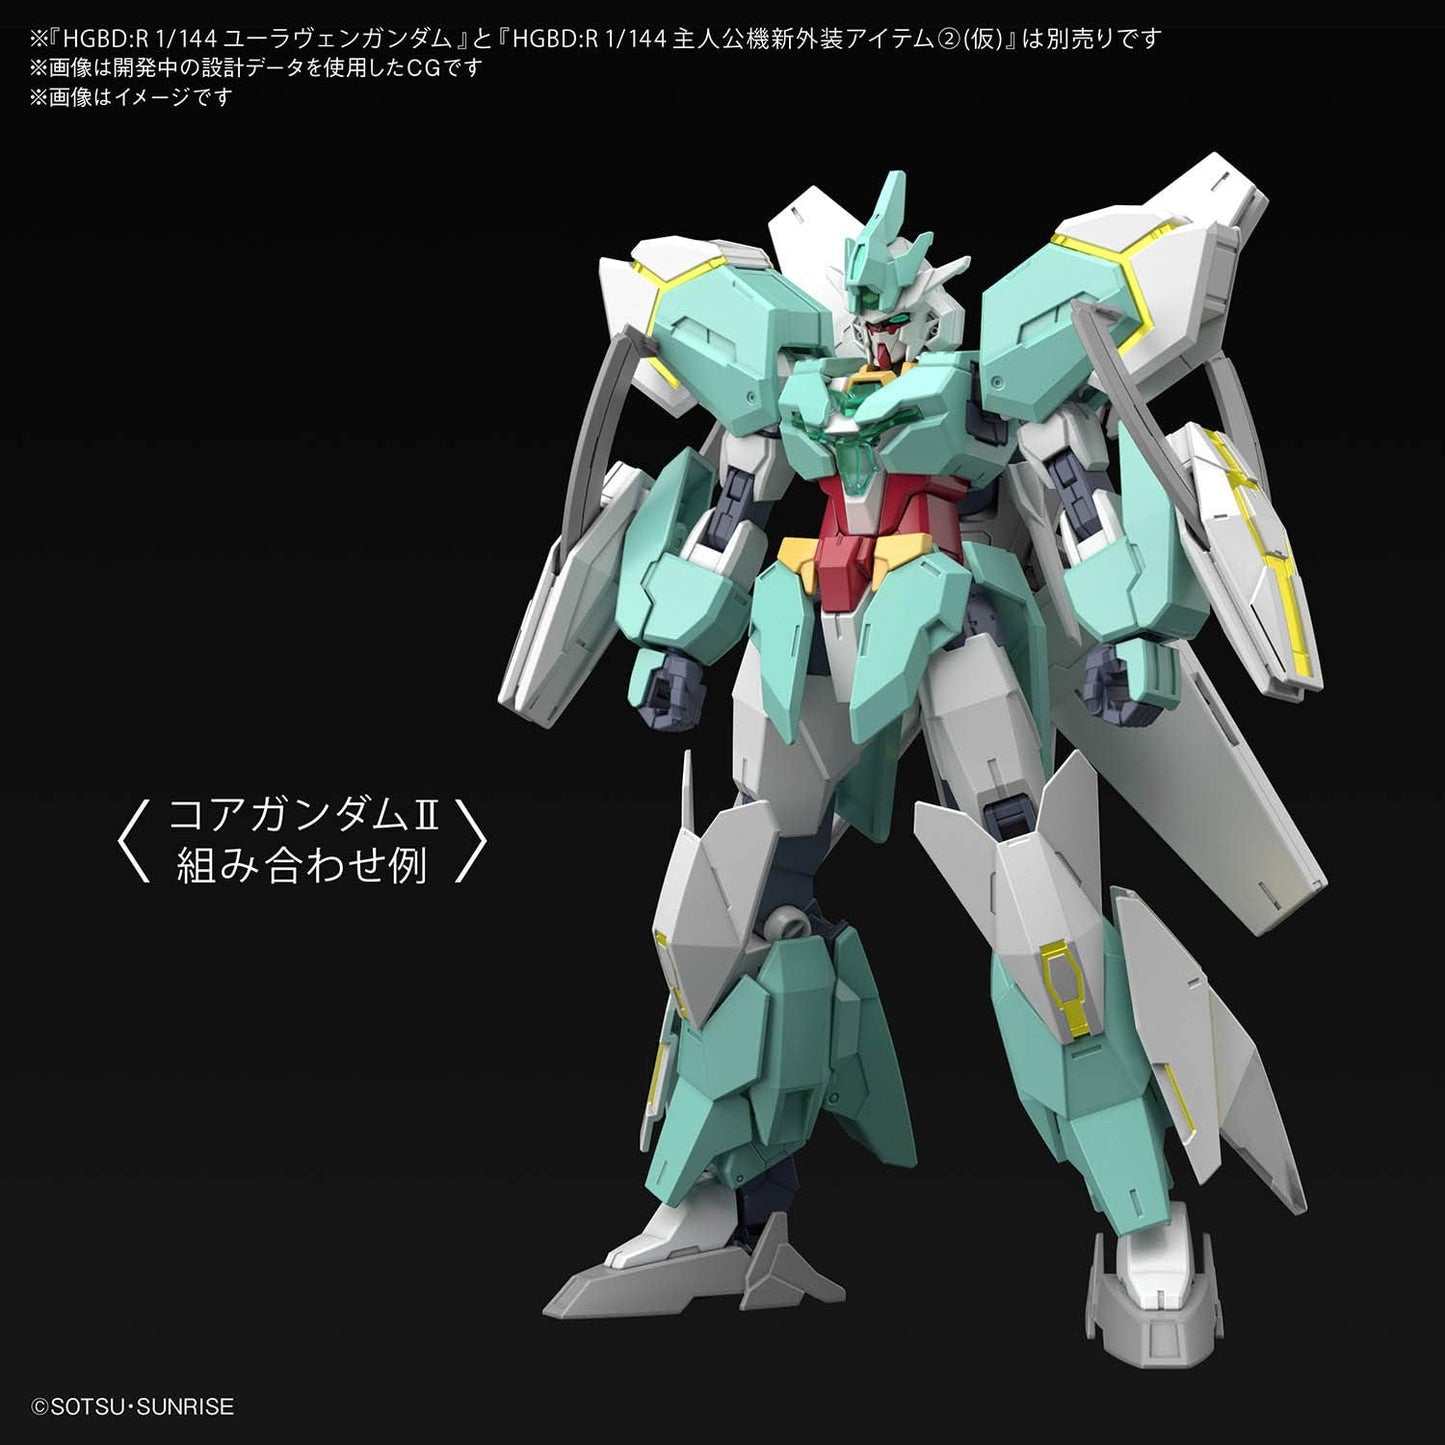 1/144 HGBD:R "Gundam Build Divers Re:Rise" Neptate Weapons | animota